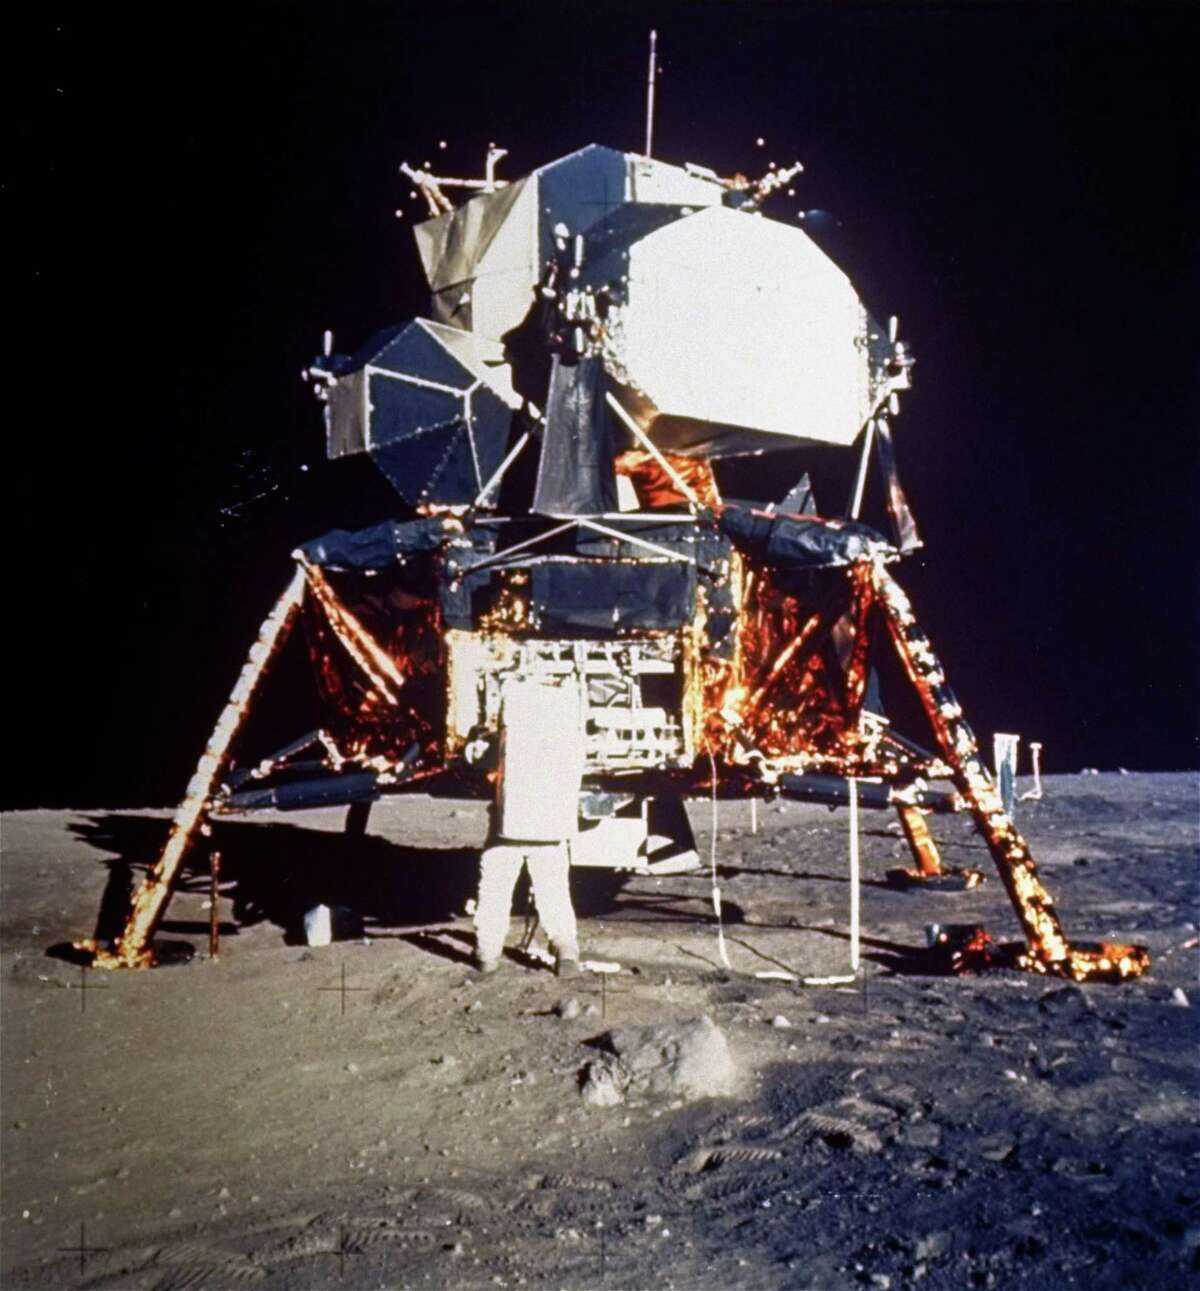 In this historic photo, Astronaut Buzz Aldrin prepares to deploy the Early Apollo Scientific Experiments Package (EASEP) during the Apollo II lunar surface extravehicular activity on July 20, 1969. Astronaut Neil A. Armstrong took the photograph with a 70mm lunar surface camera.